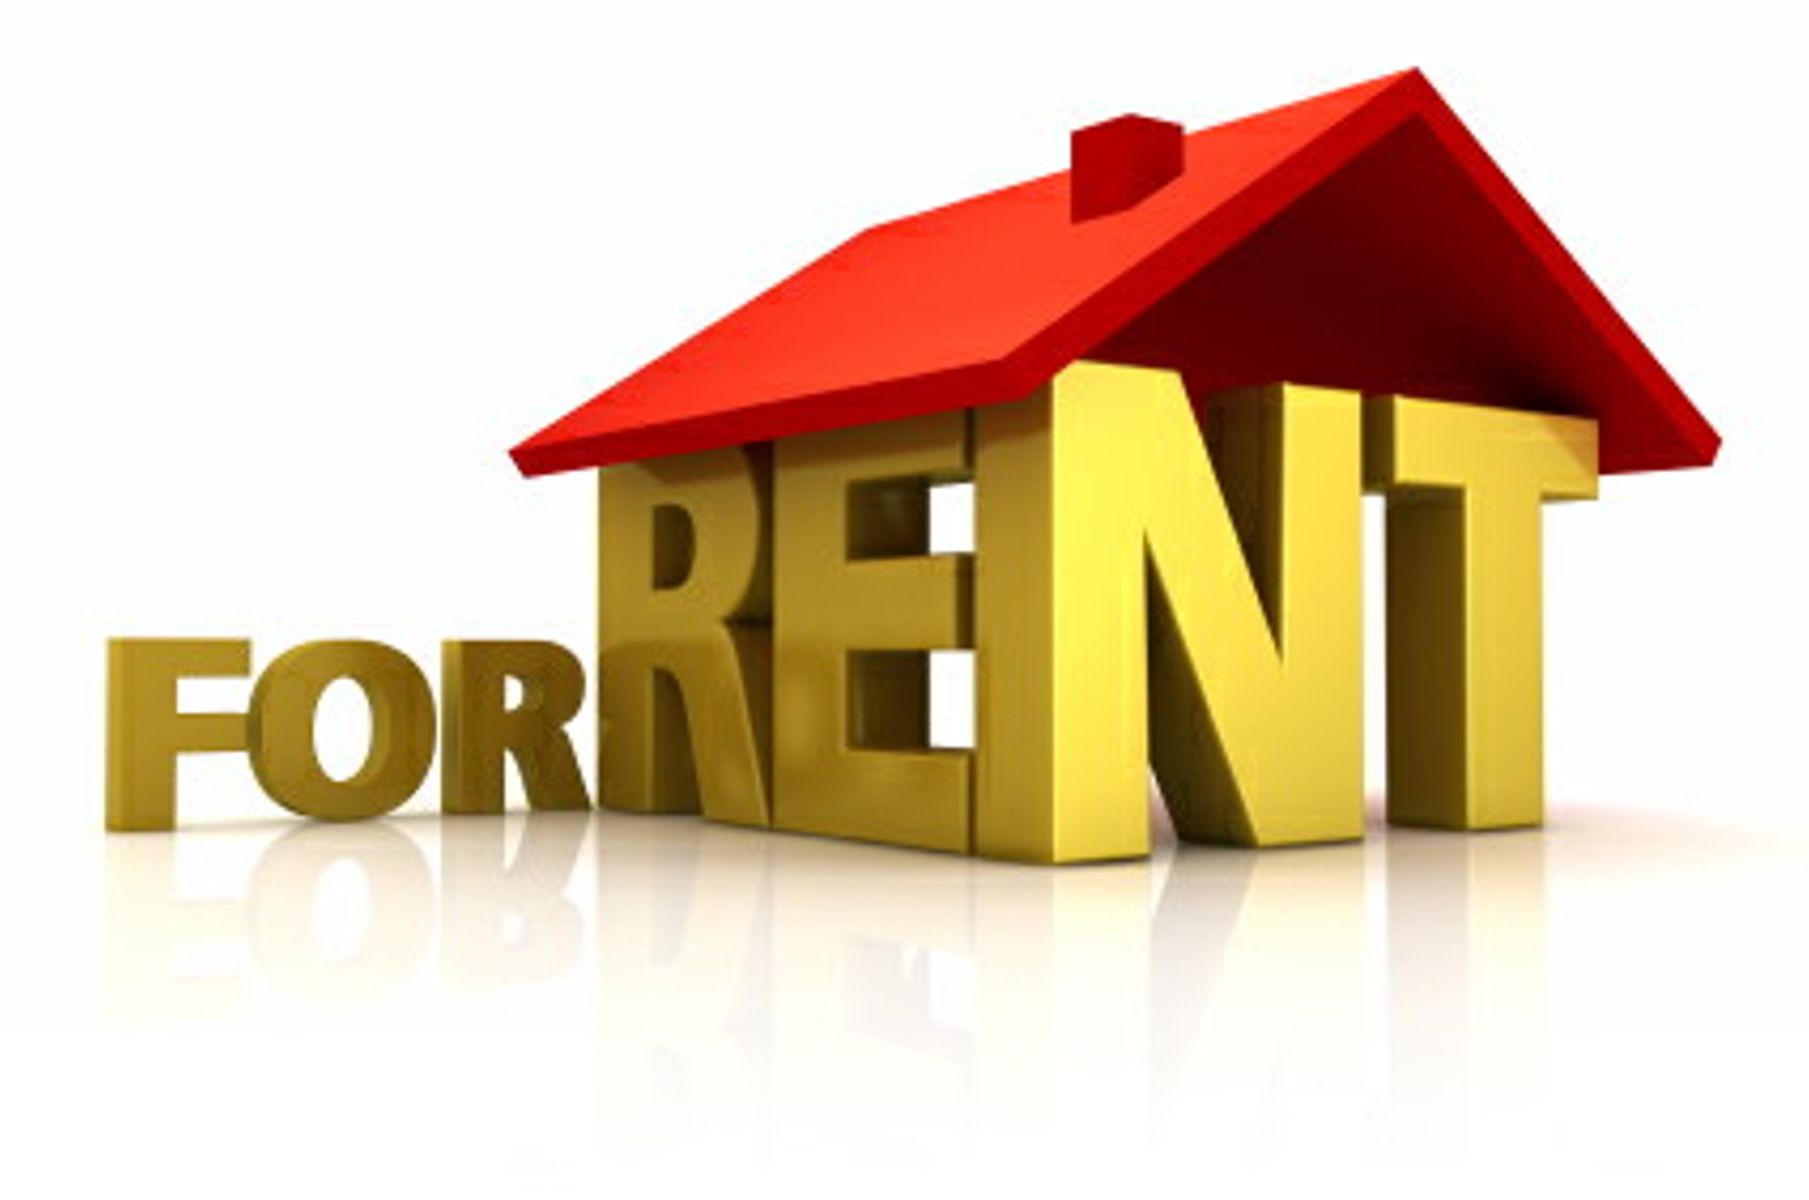 LANDLORDS AND THEIR RESPONSIBILITY TO THEIR RENTAL INVESTMENT